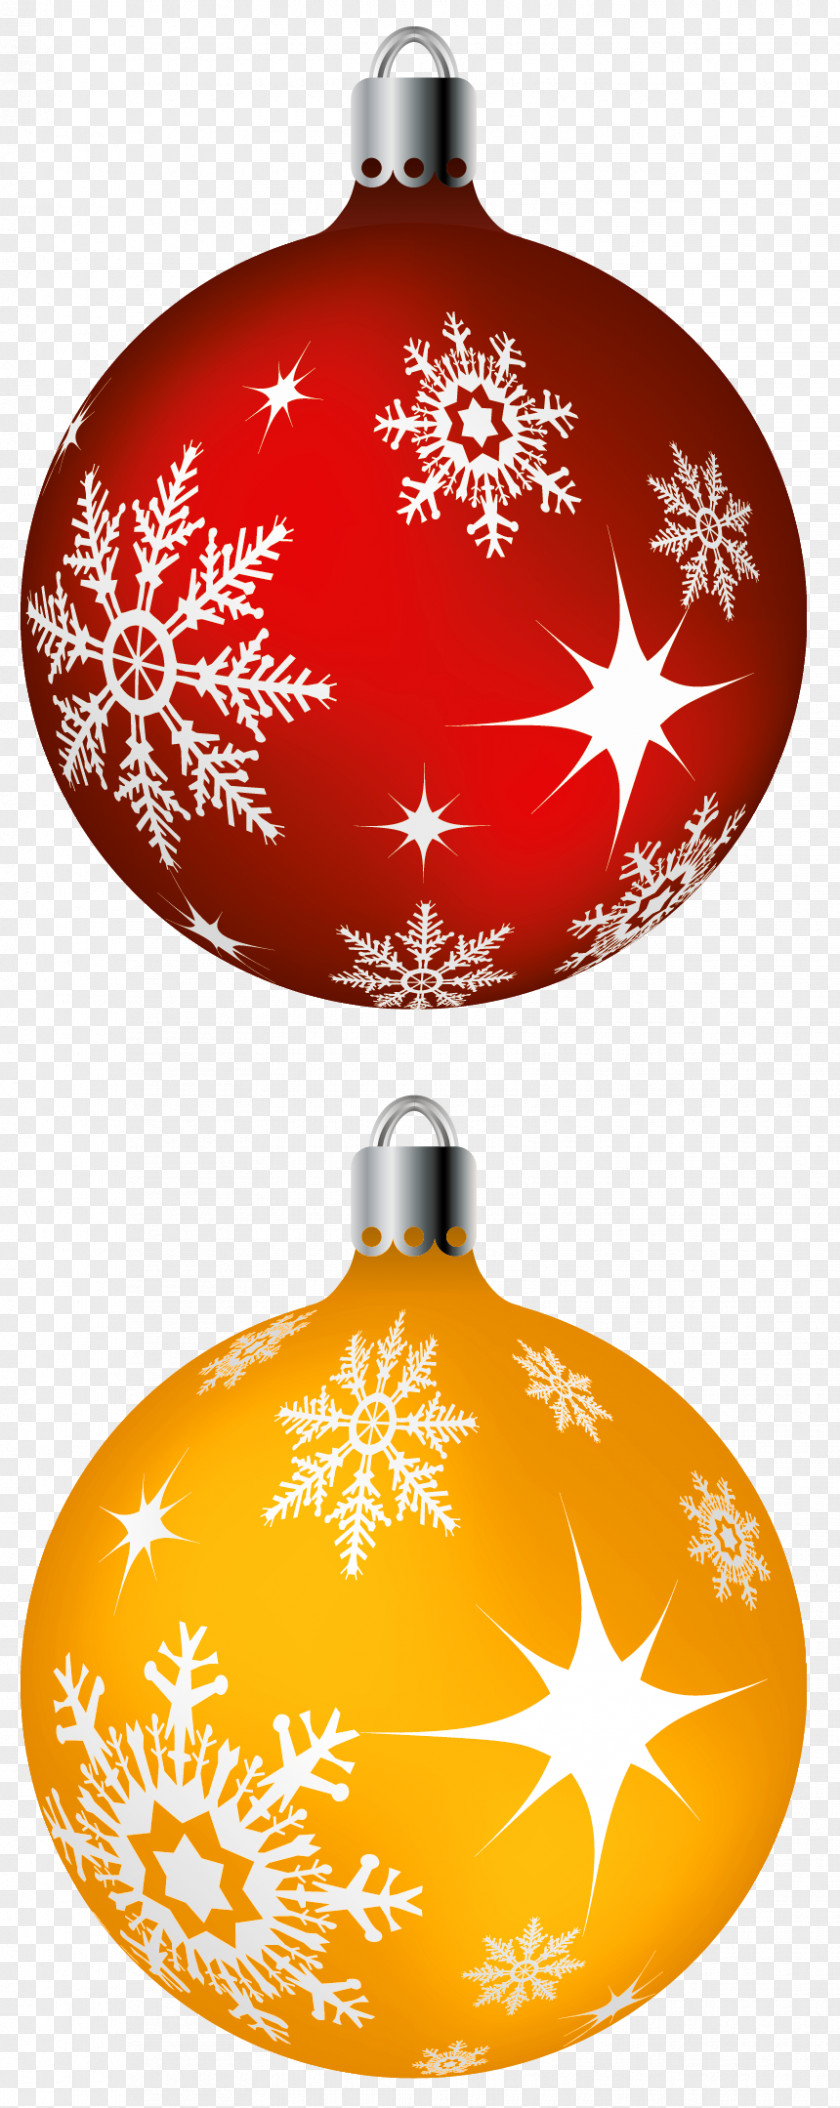 Red And Yellow Christmas Balls Clipart Picture Ornament Decoration Santa Claus Clip Art PNG